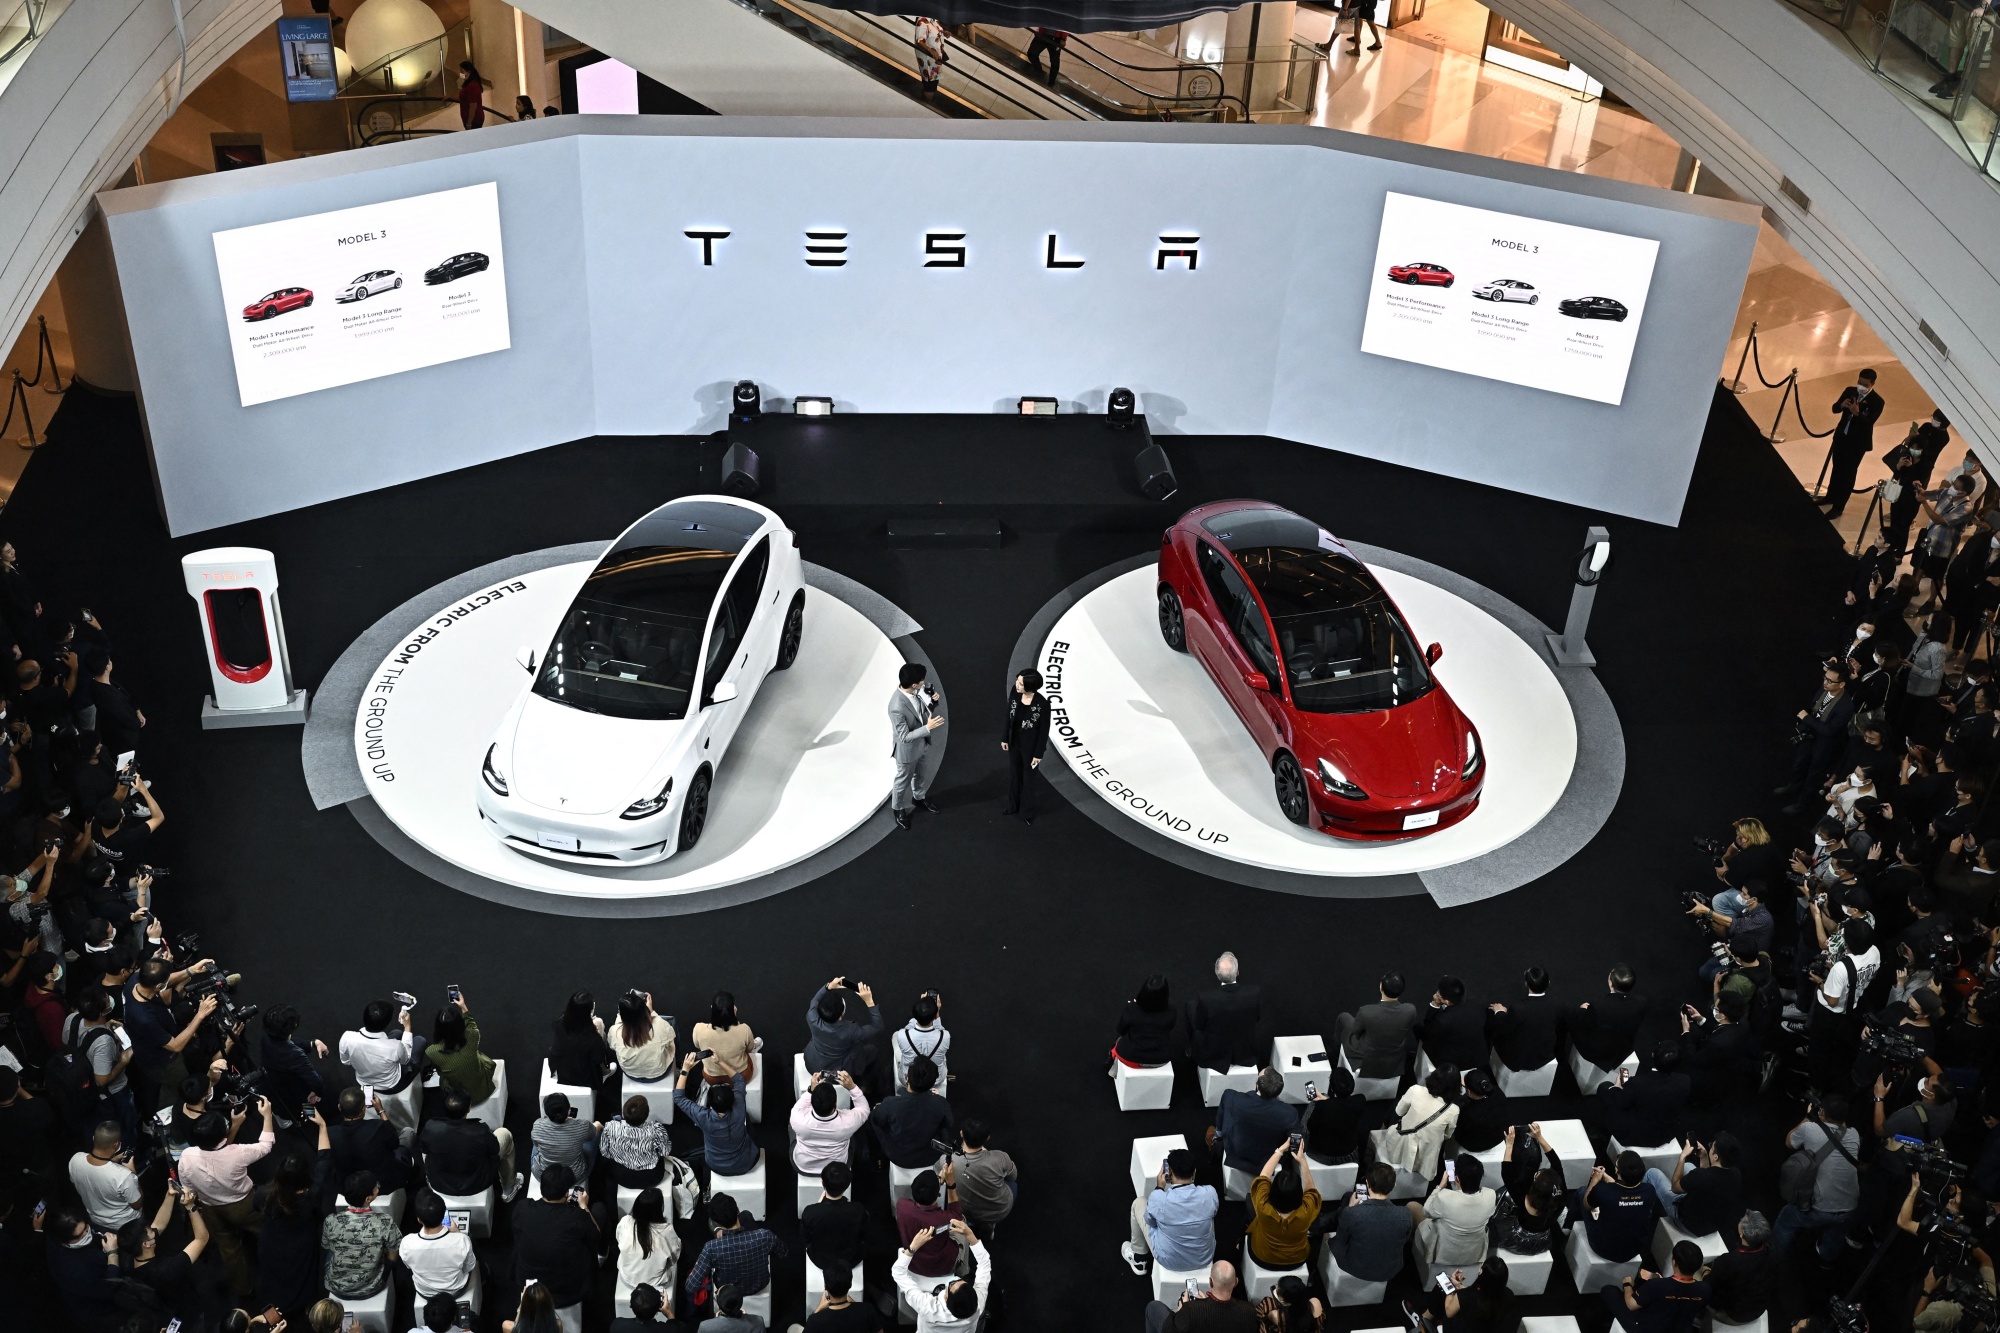 Tesla Refreshes Model 3 With Longer Range, Higher Price in China - Bloomberg